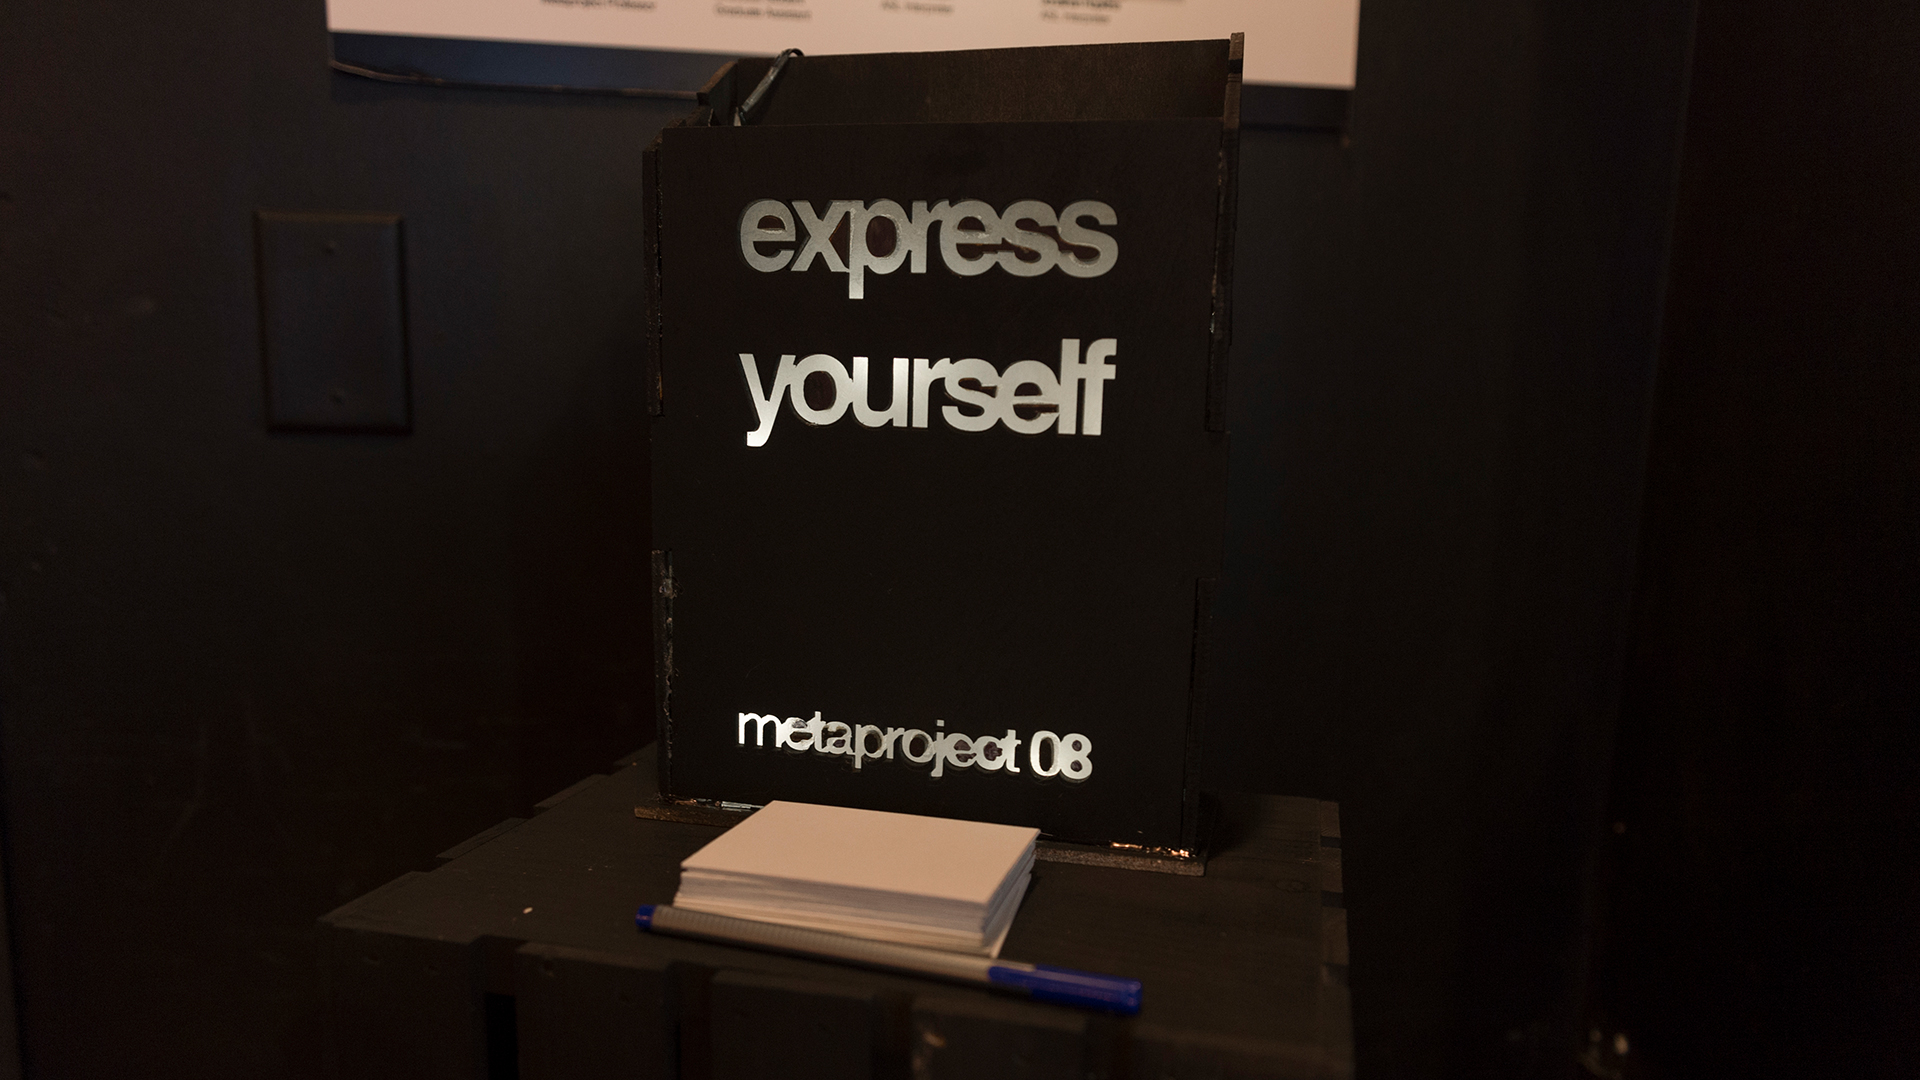 black sign with illuminated text on stand with stack of papers and pen